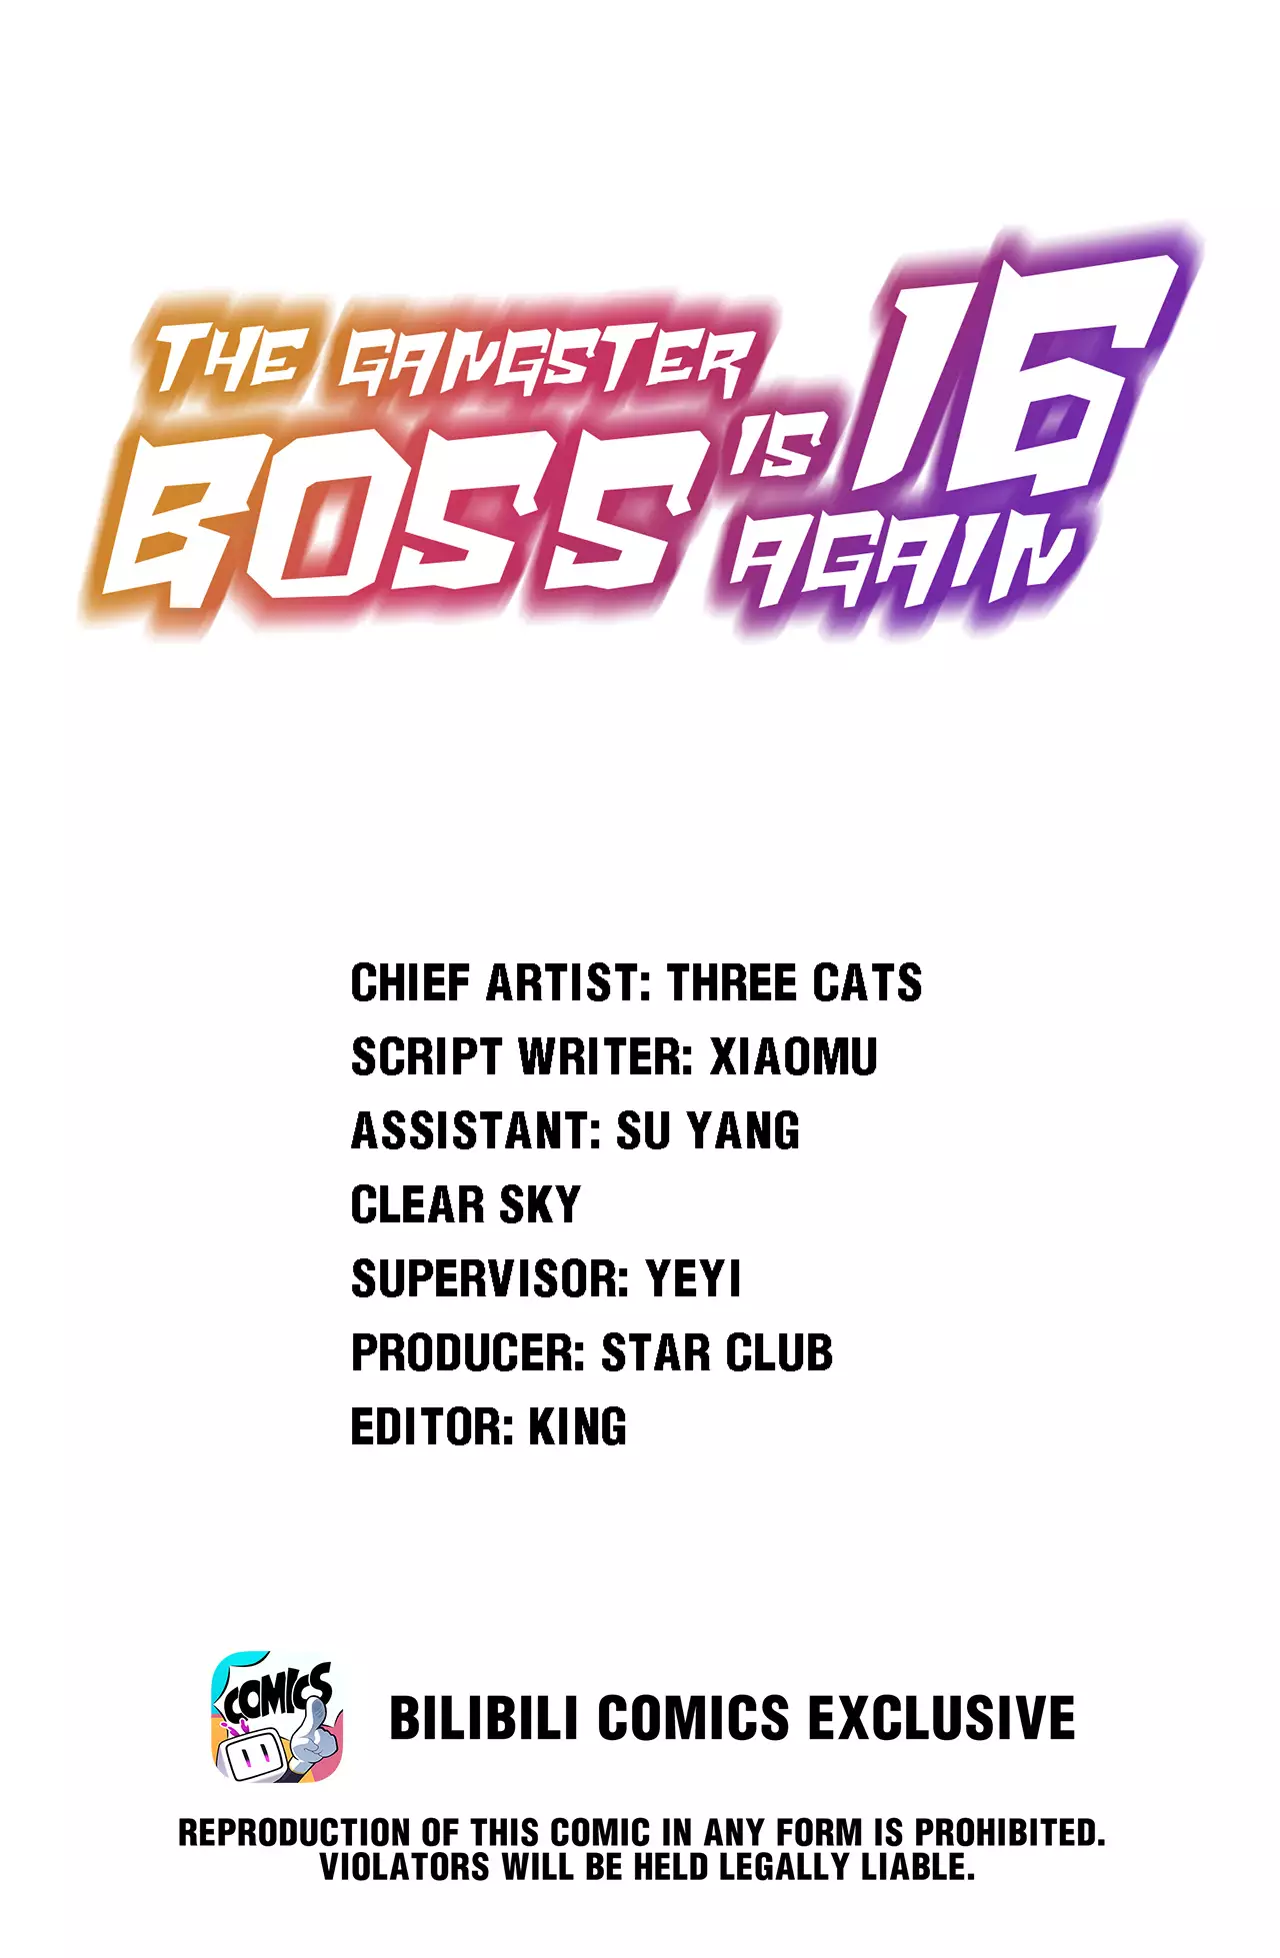 The Gangster Boss Is 16 Again - 158 page 1-00b1a8d0